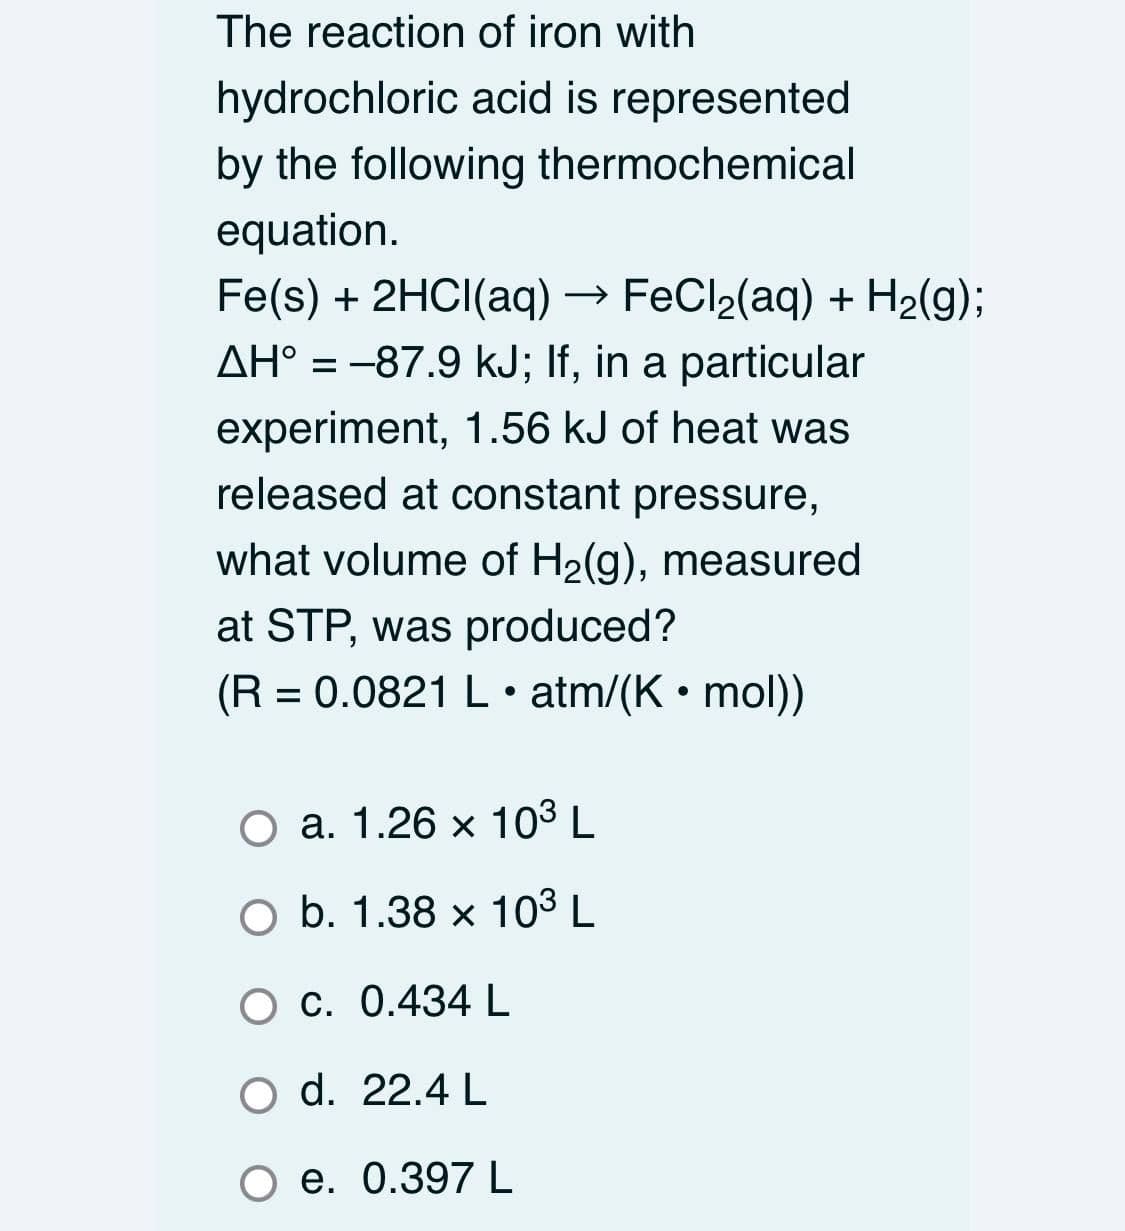 The reaction of iron with
hydrochloric acid is represented
by the following thermochemical
equation.
Fe(s) + 2HCI(aq)
FeCl2(aq) + H2(g);
AH° = -87.9 kJ; If, in a particular
experiment, 1.56 kJ of heat was
released at constant pressure,
what volume of H2(g), measured
at STP, was produced?
(R = 0.0821 L • atm/(K • mol))
O a. 1.26 x 103 L
O b. 1.38 x 103 L
O c. 0.434 L
O d. 22.4 L
O e. 0.397 L
